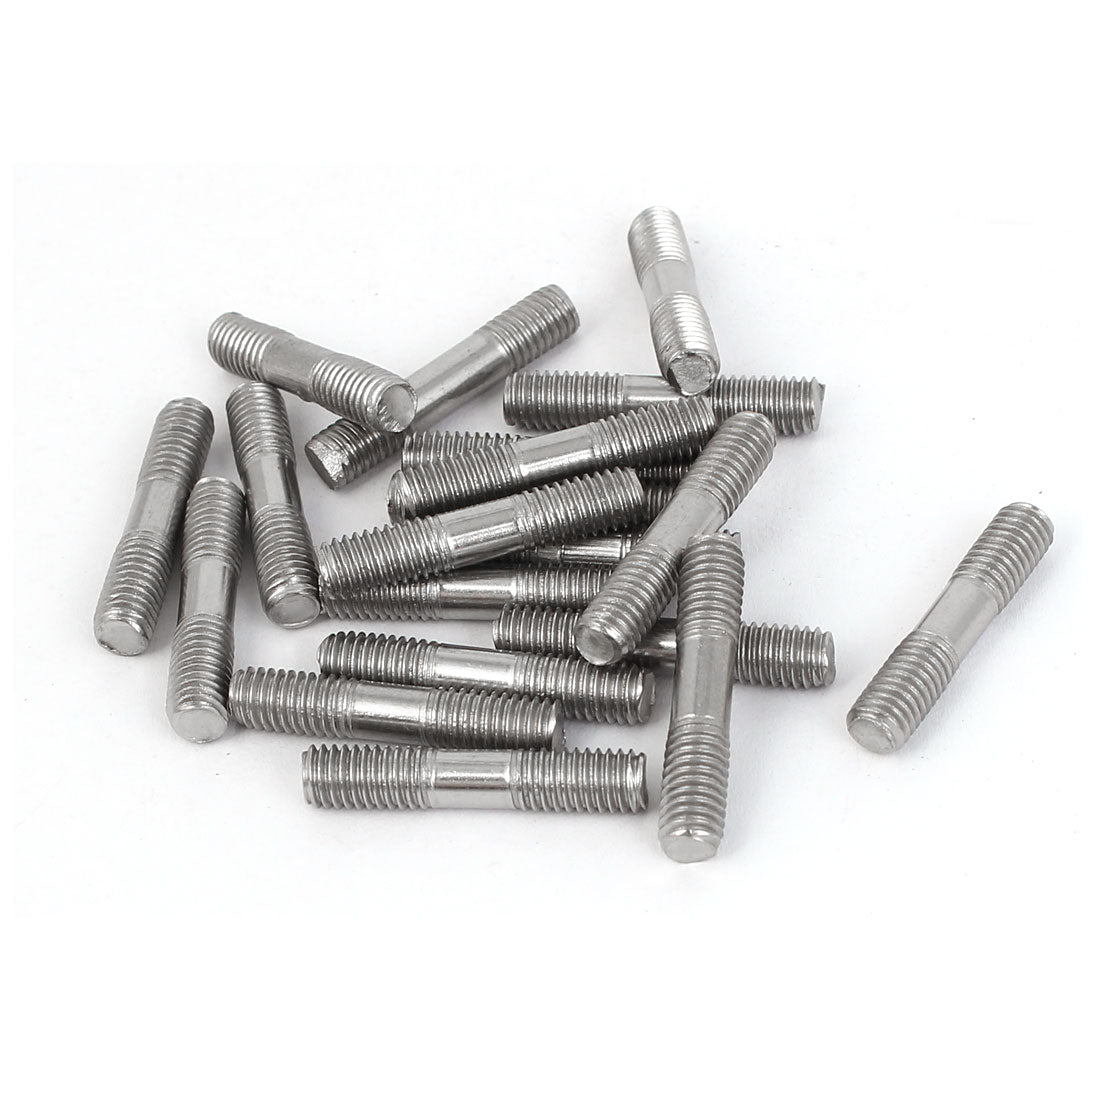 uxcell Uxcell M5x25mm 304 Stainless Steel Double End Thread Tight Adjustable Push Rod Stud 20pcs